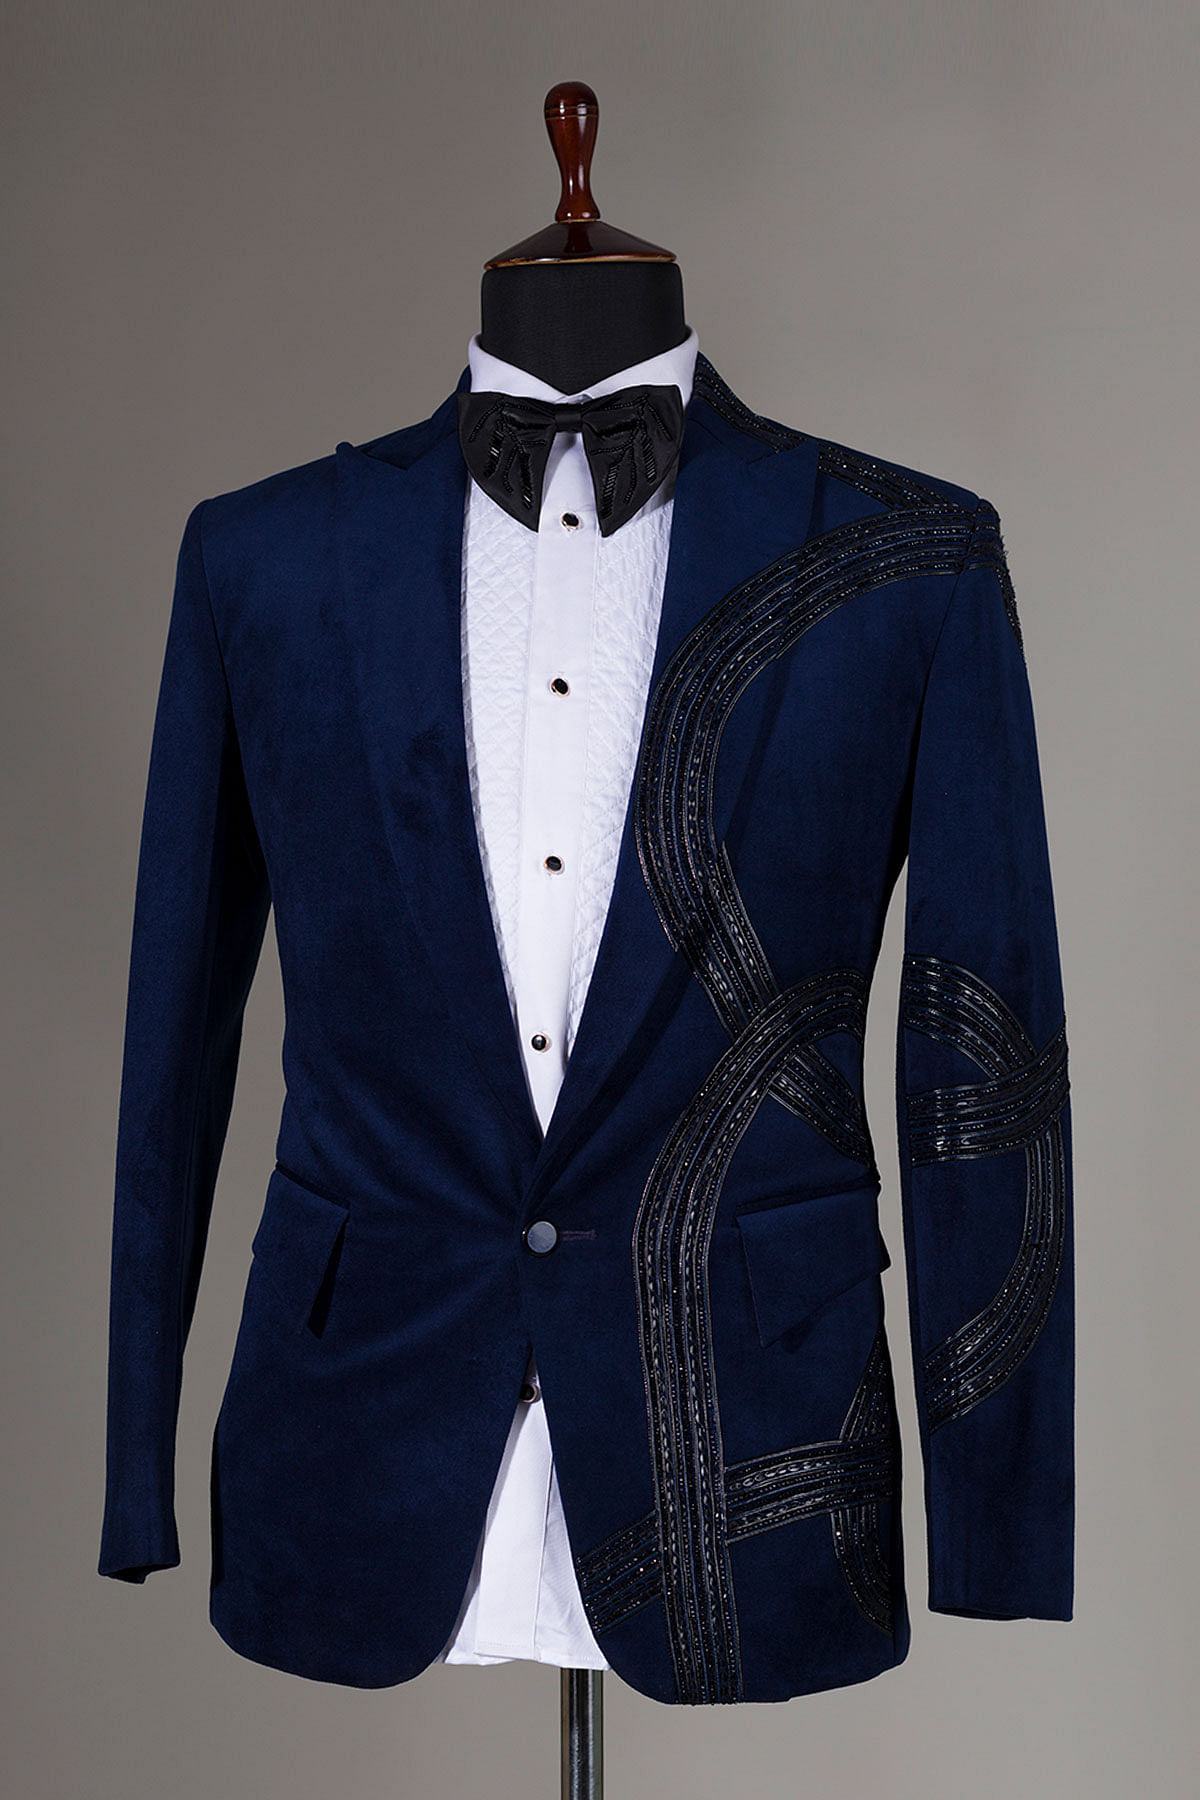 Custom Embroidered Black Suede Suit Mens Classic Style For Weddings, Proms,  And Groomsmen 2023 Arrival Includes Jacket, Vest, Pants, Tie Style #230216  From Hu01, $131.71 | DHgate.Com